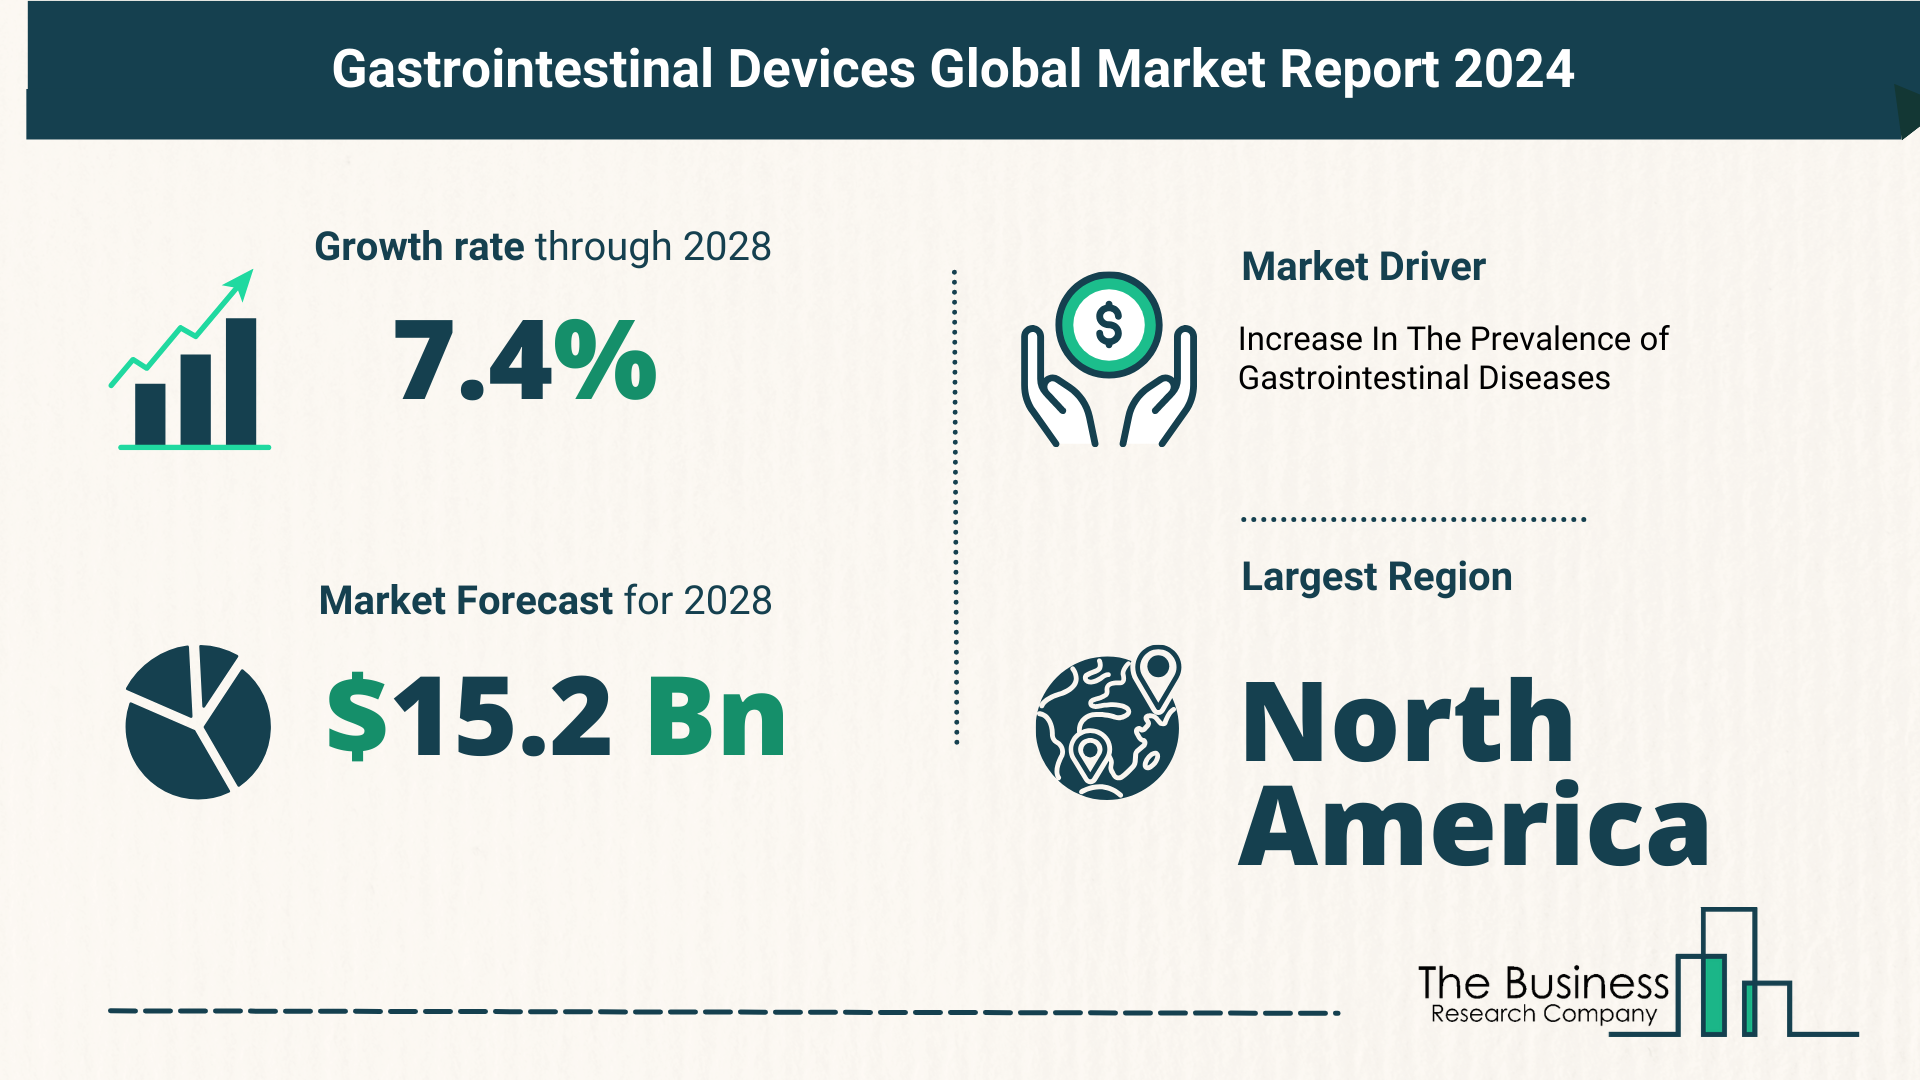 What Is The Forecast Growth Rate For The Gastrointestinal Devices Market?